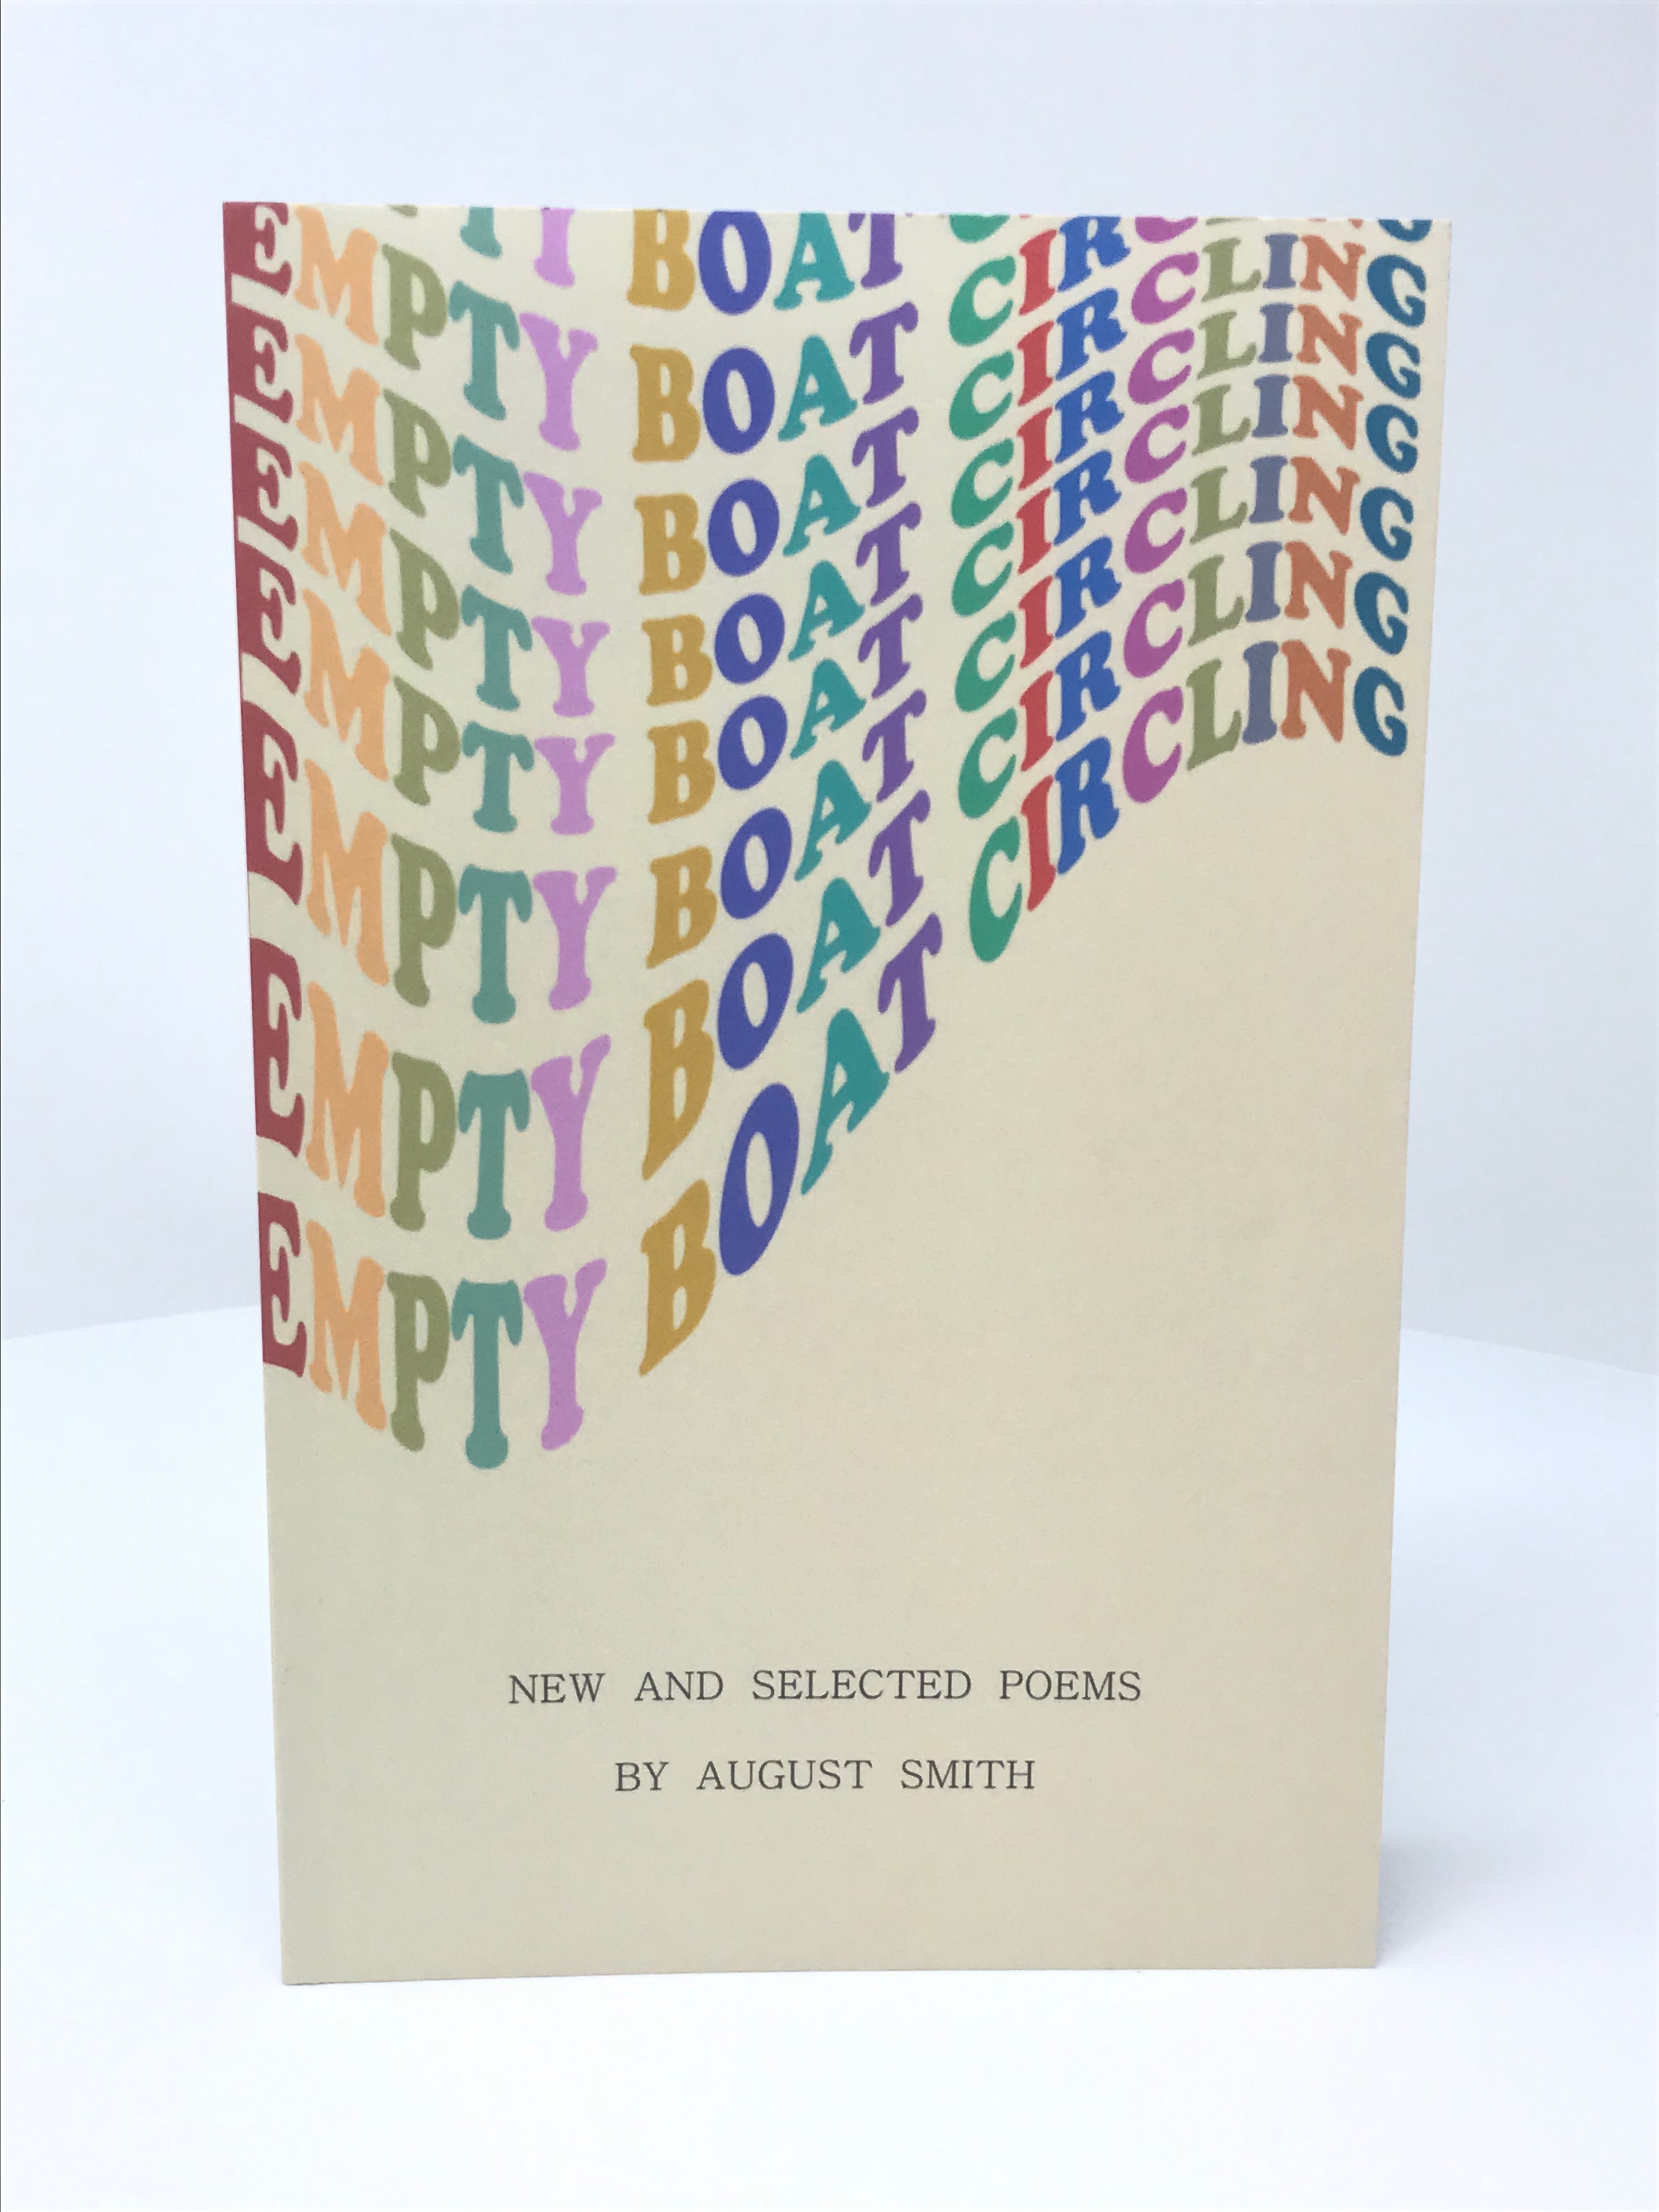 "Empty Boat Circling" by August Smith book cover